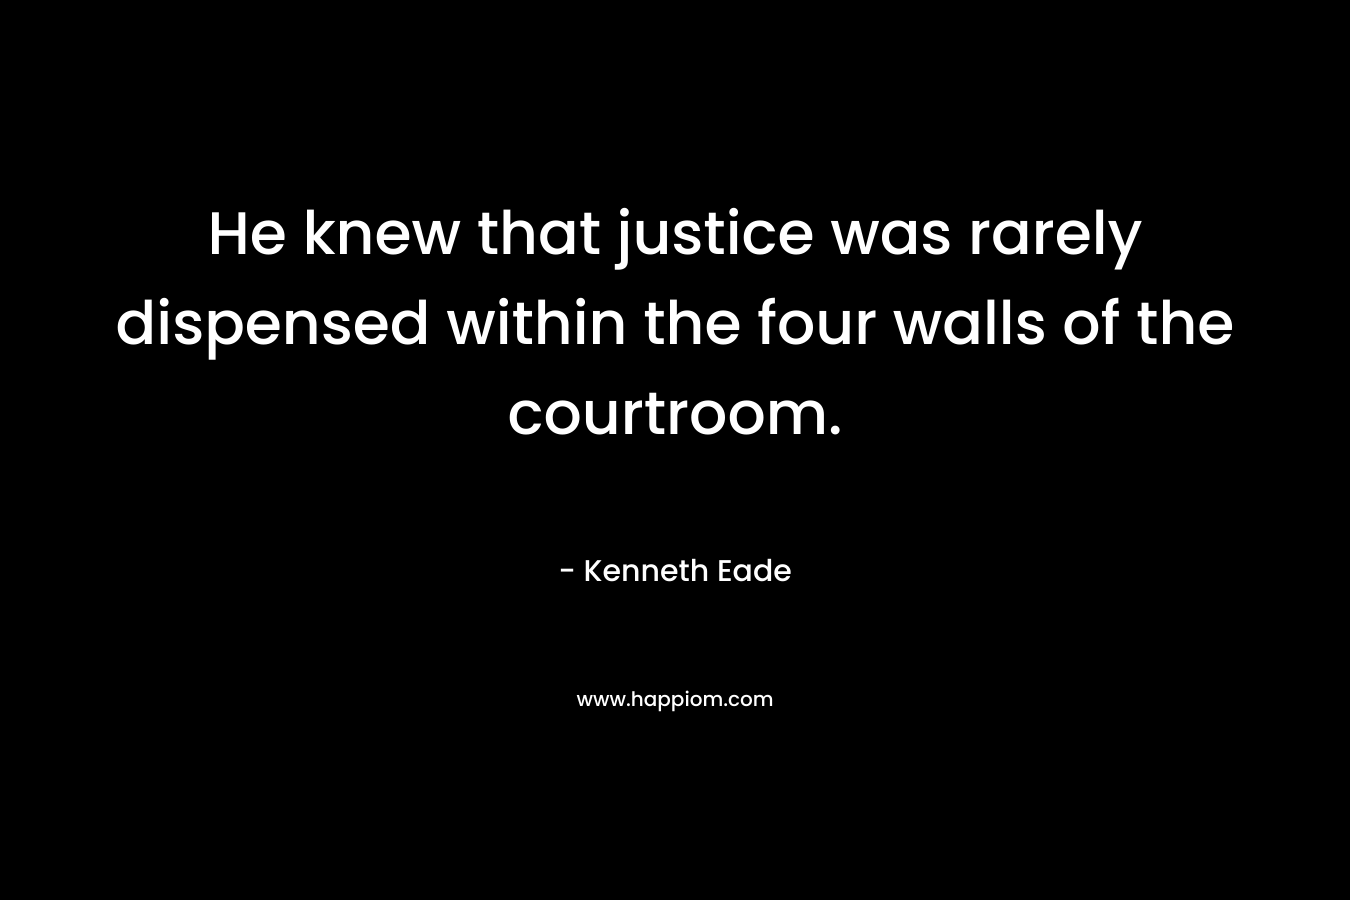 He knew that justice was rarely dispensed within the four walls of the courtroom.